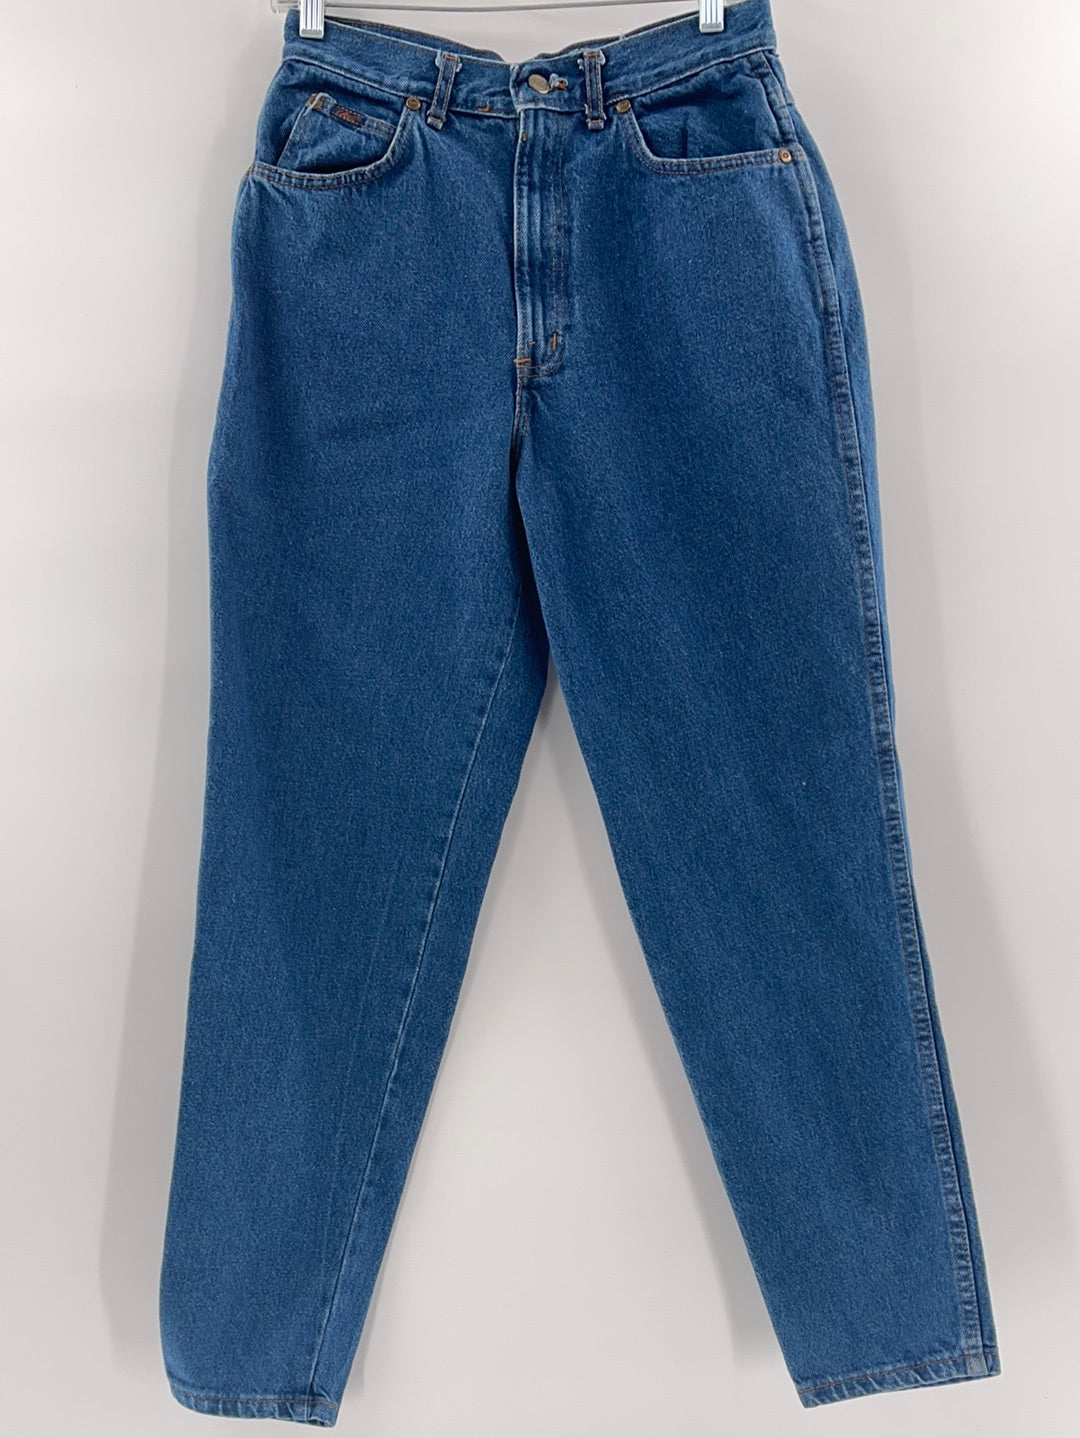 Chic Vintage High Waisted Mom Jeans (Size 12)